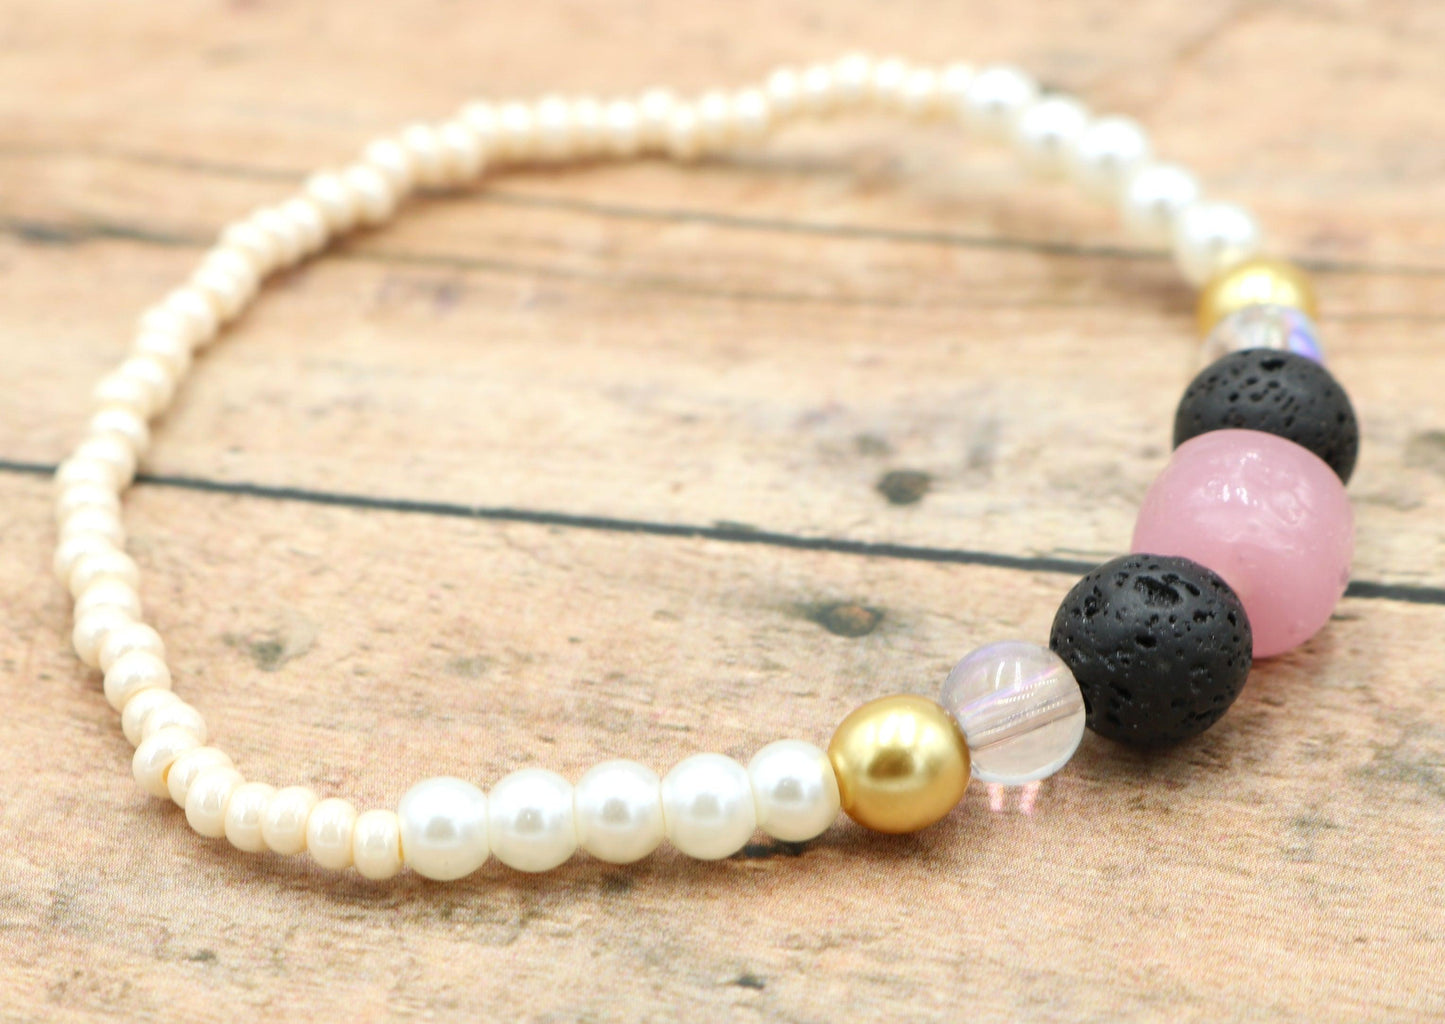 Rose in a Concrete Jungle - Rose Pink, Black, Yellow Gold, Pearls, and White Delight Women's Glass Bracelet - Monkeysmojo